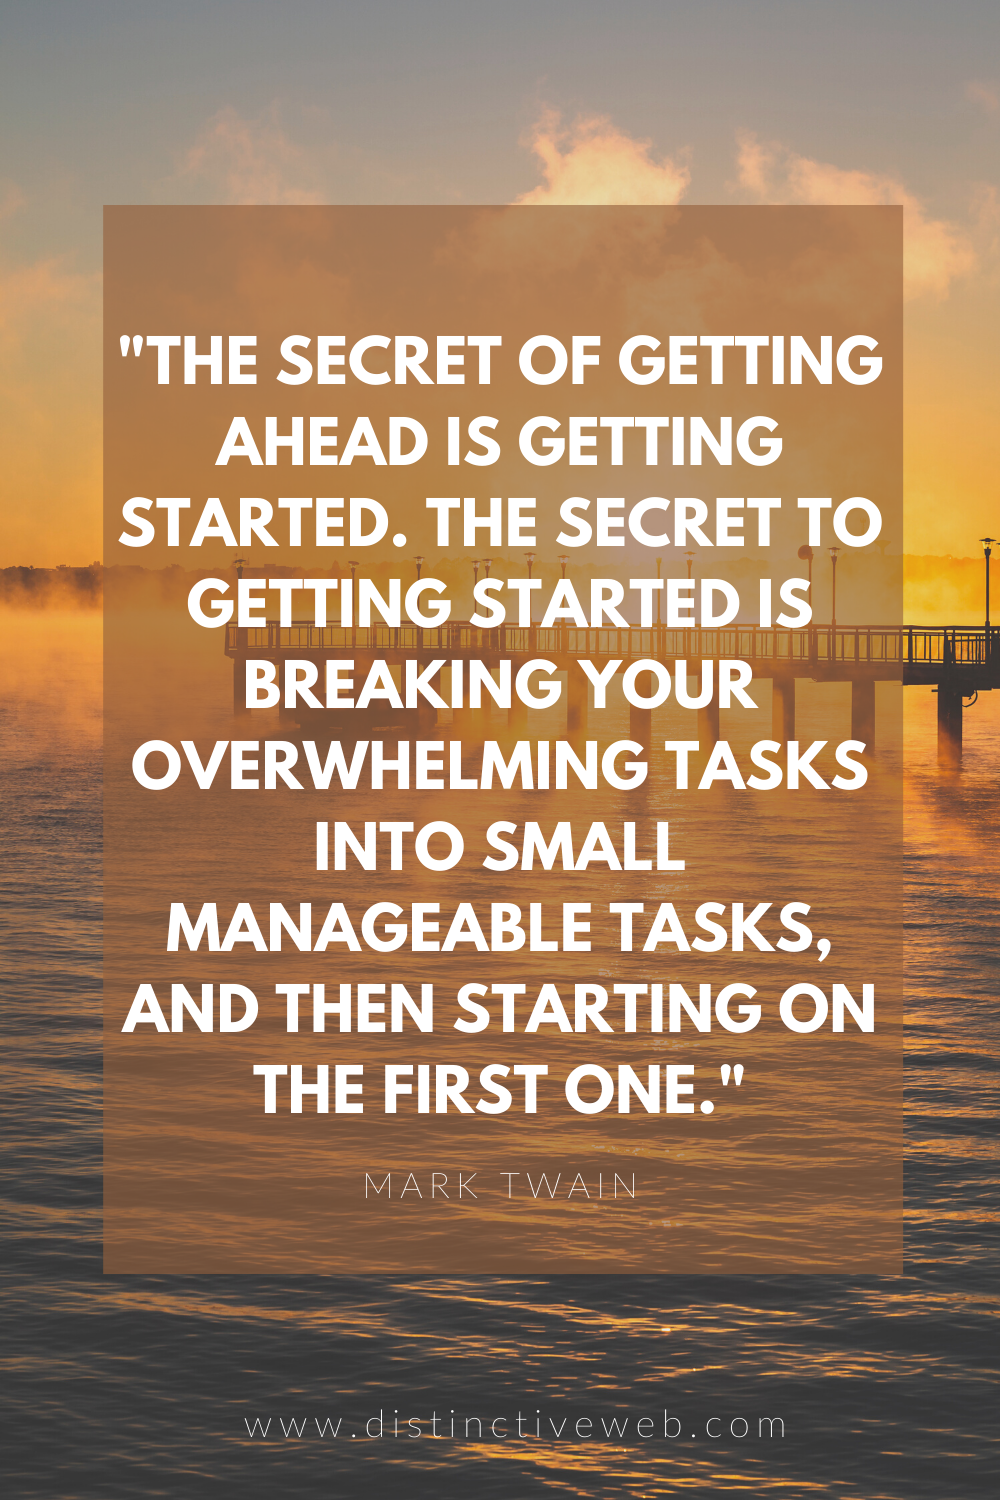 Inspirational Quote About Conquering Overwhelm